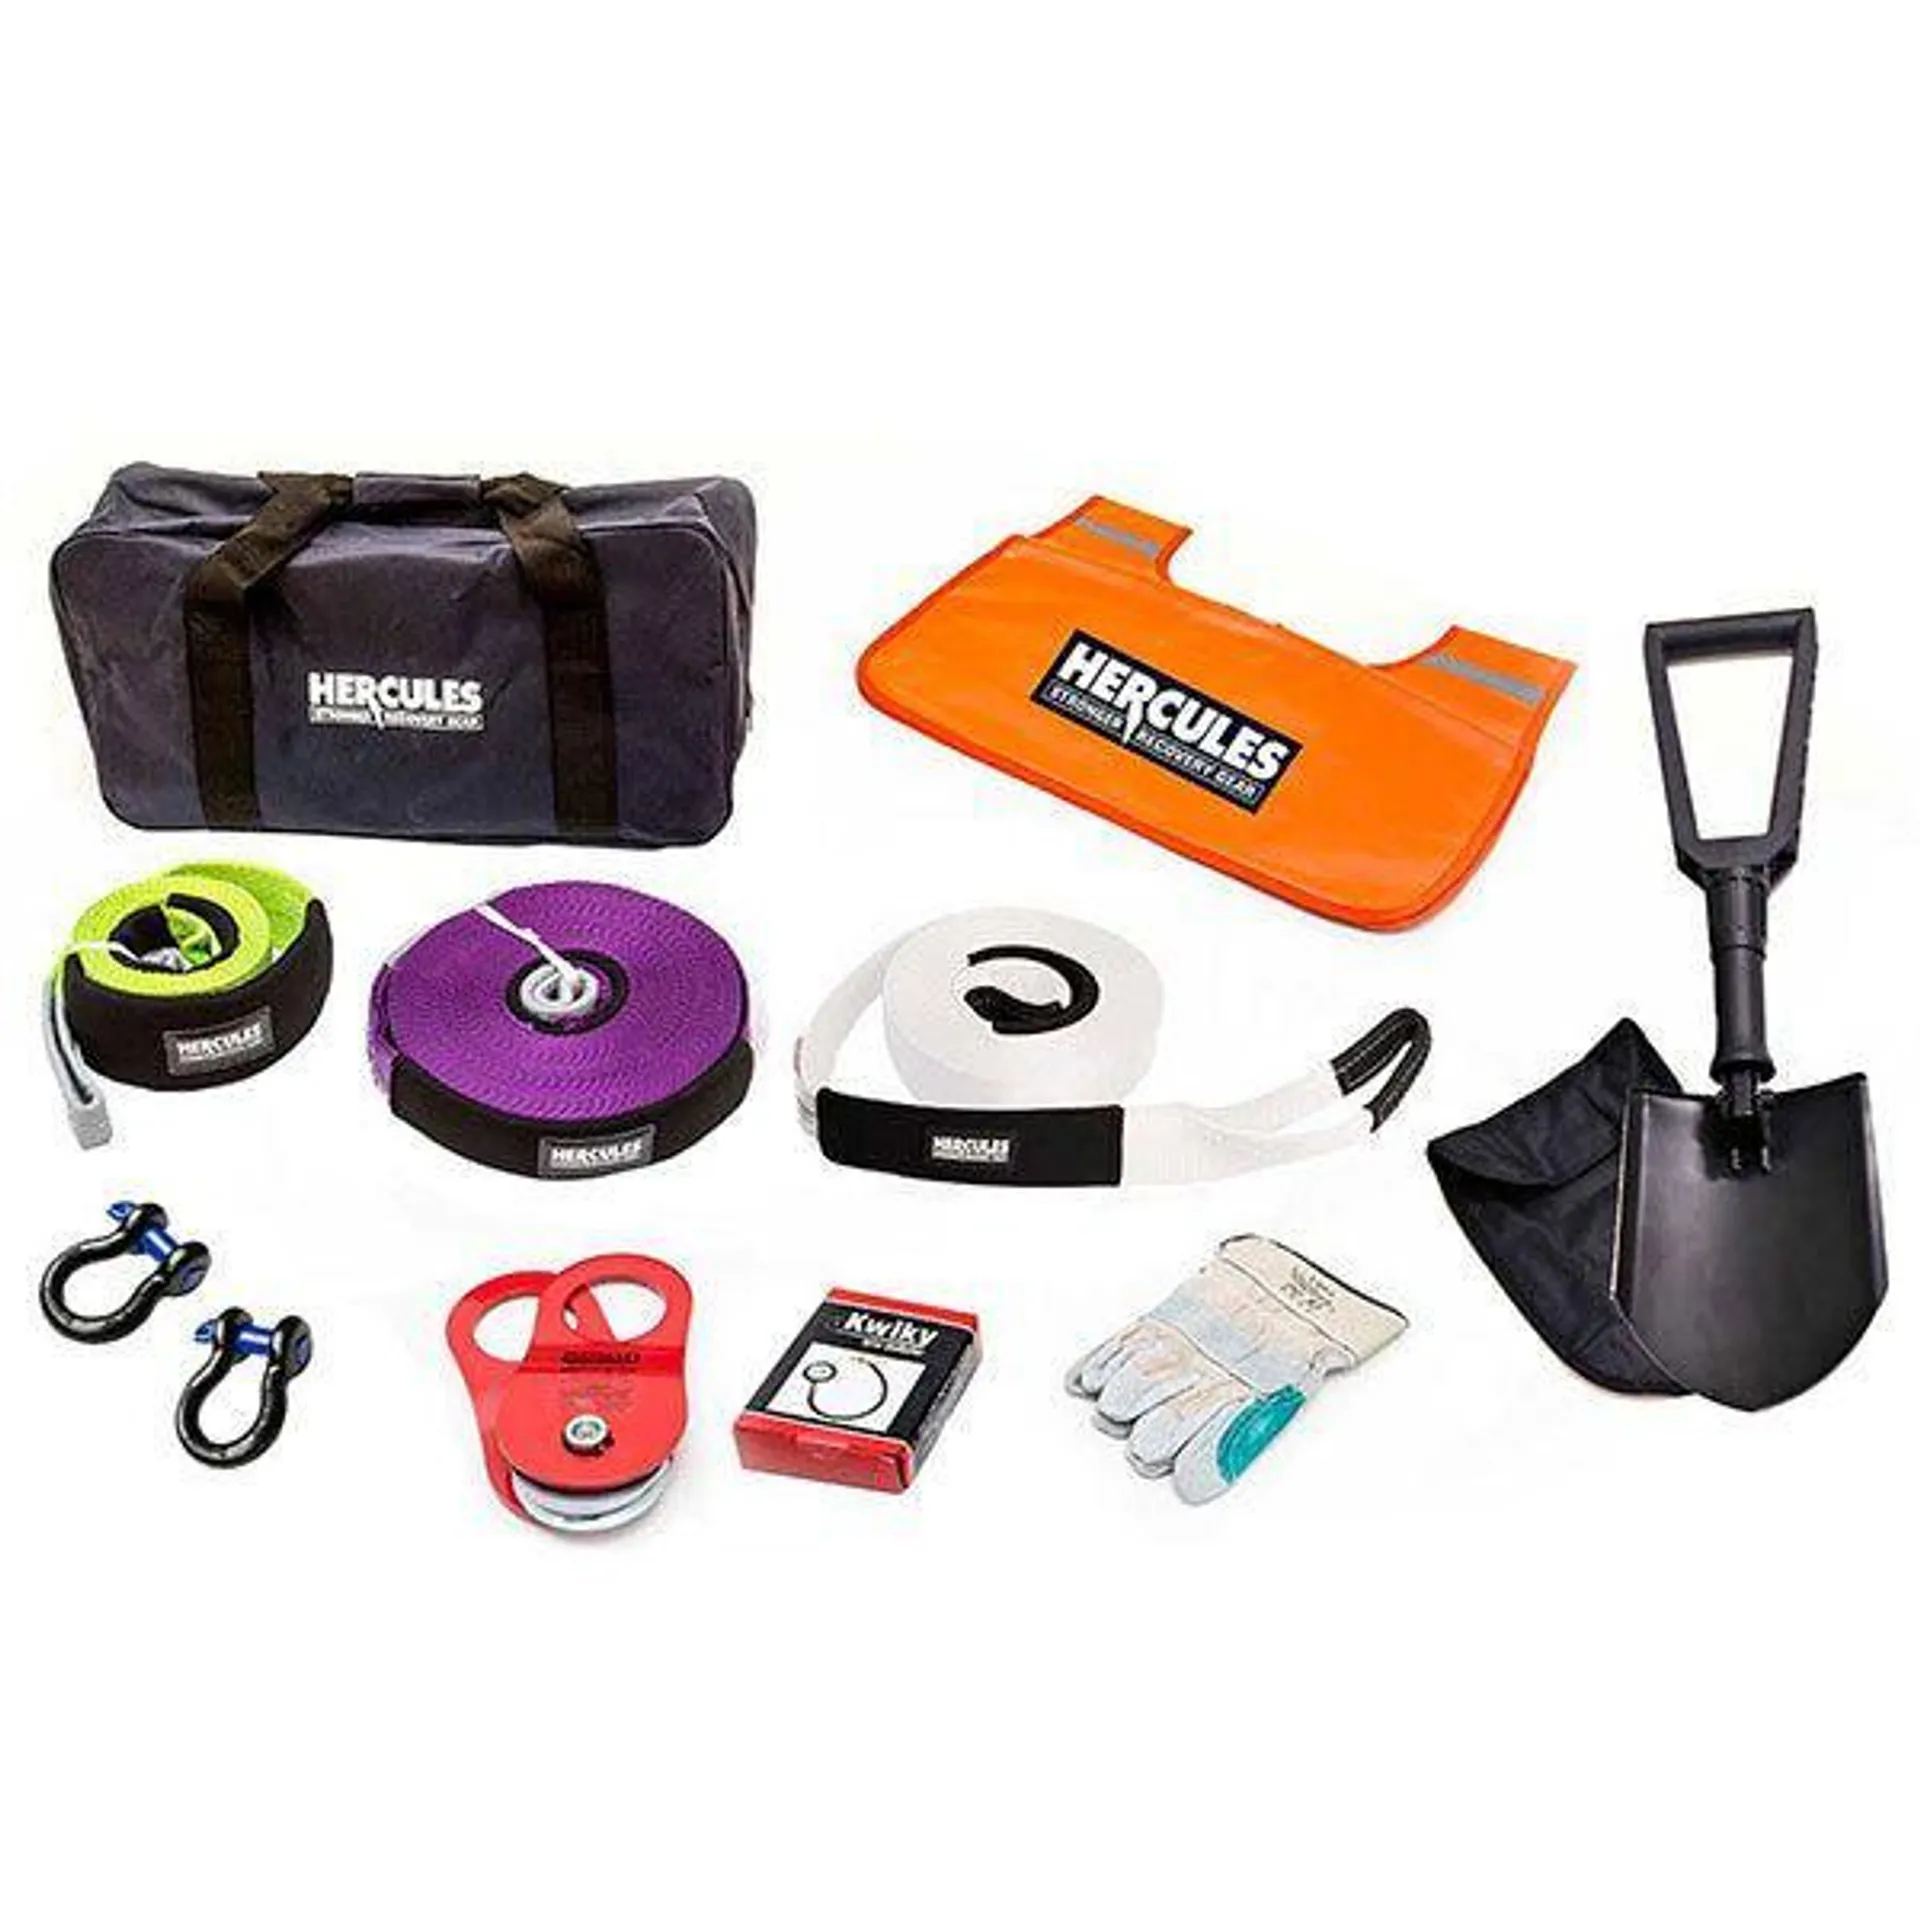 Hercules Complete Recovery Kit - 11-piece | Snatch, Winch & 4WD Gear